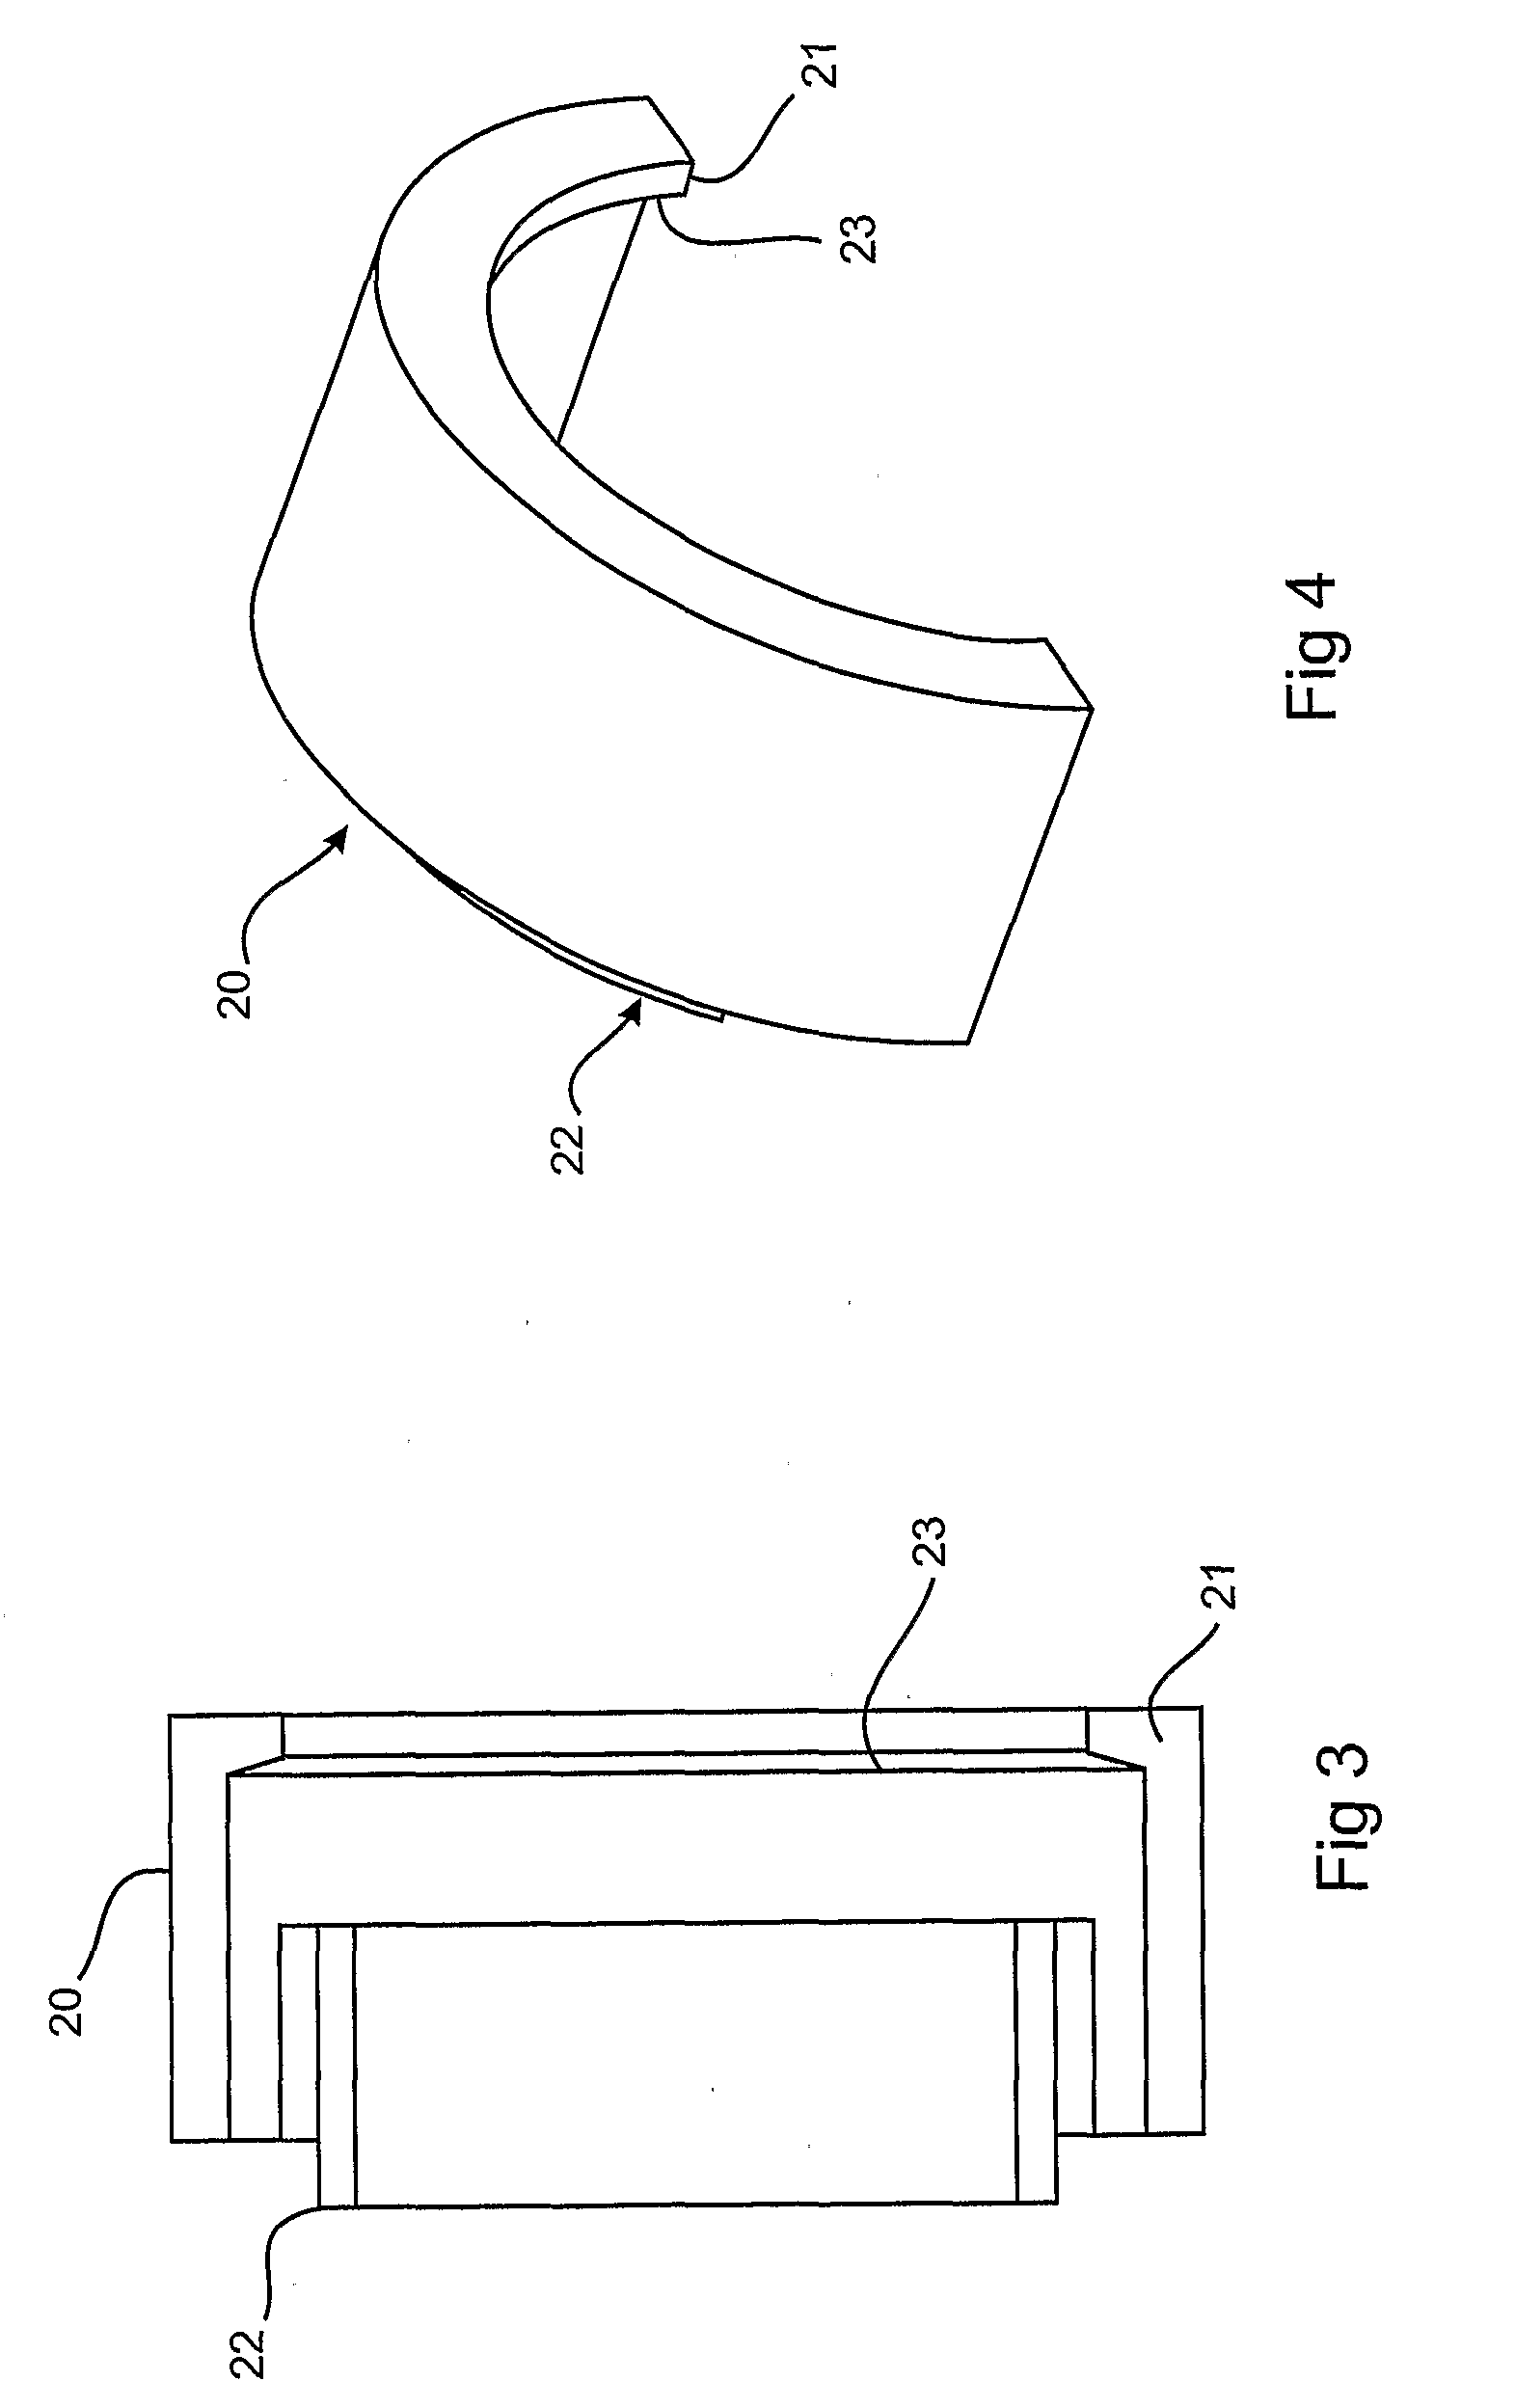 Coupling arrangement and system for continuous haulage conveyor